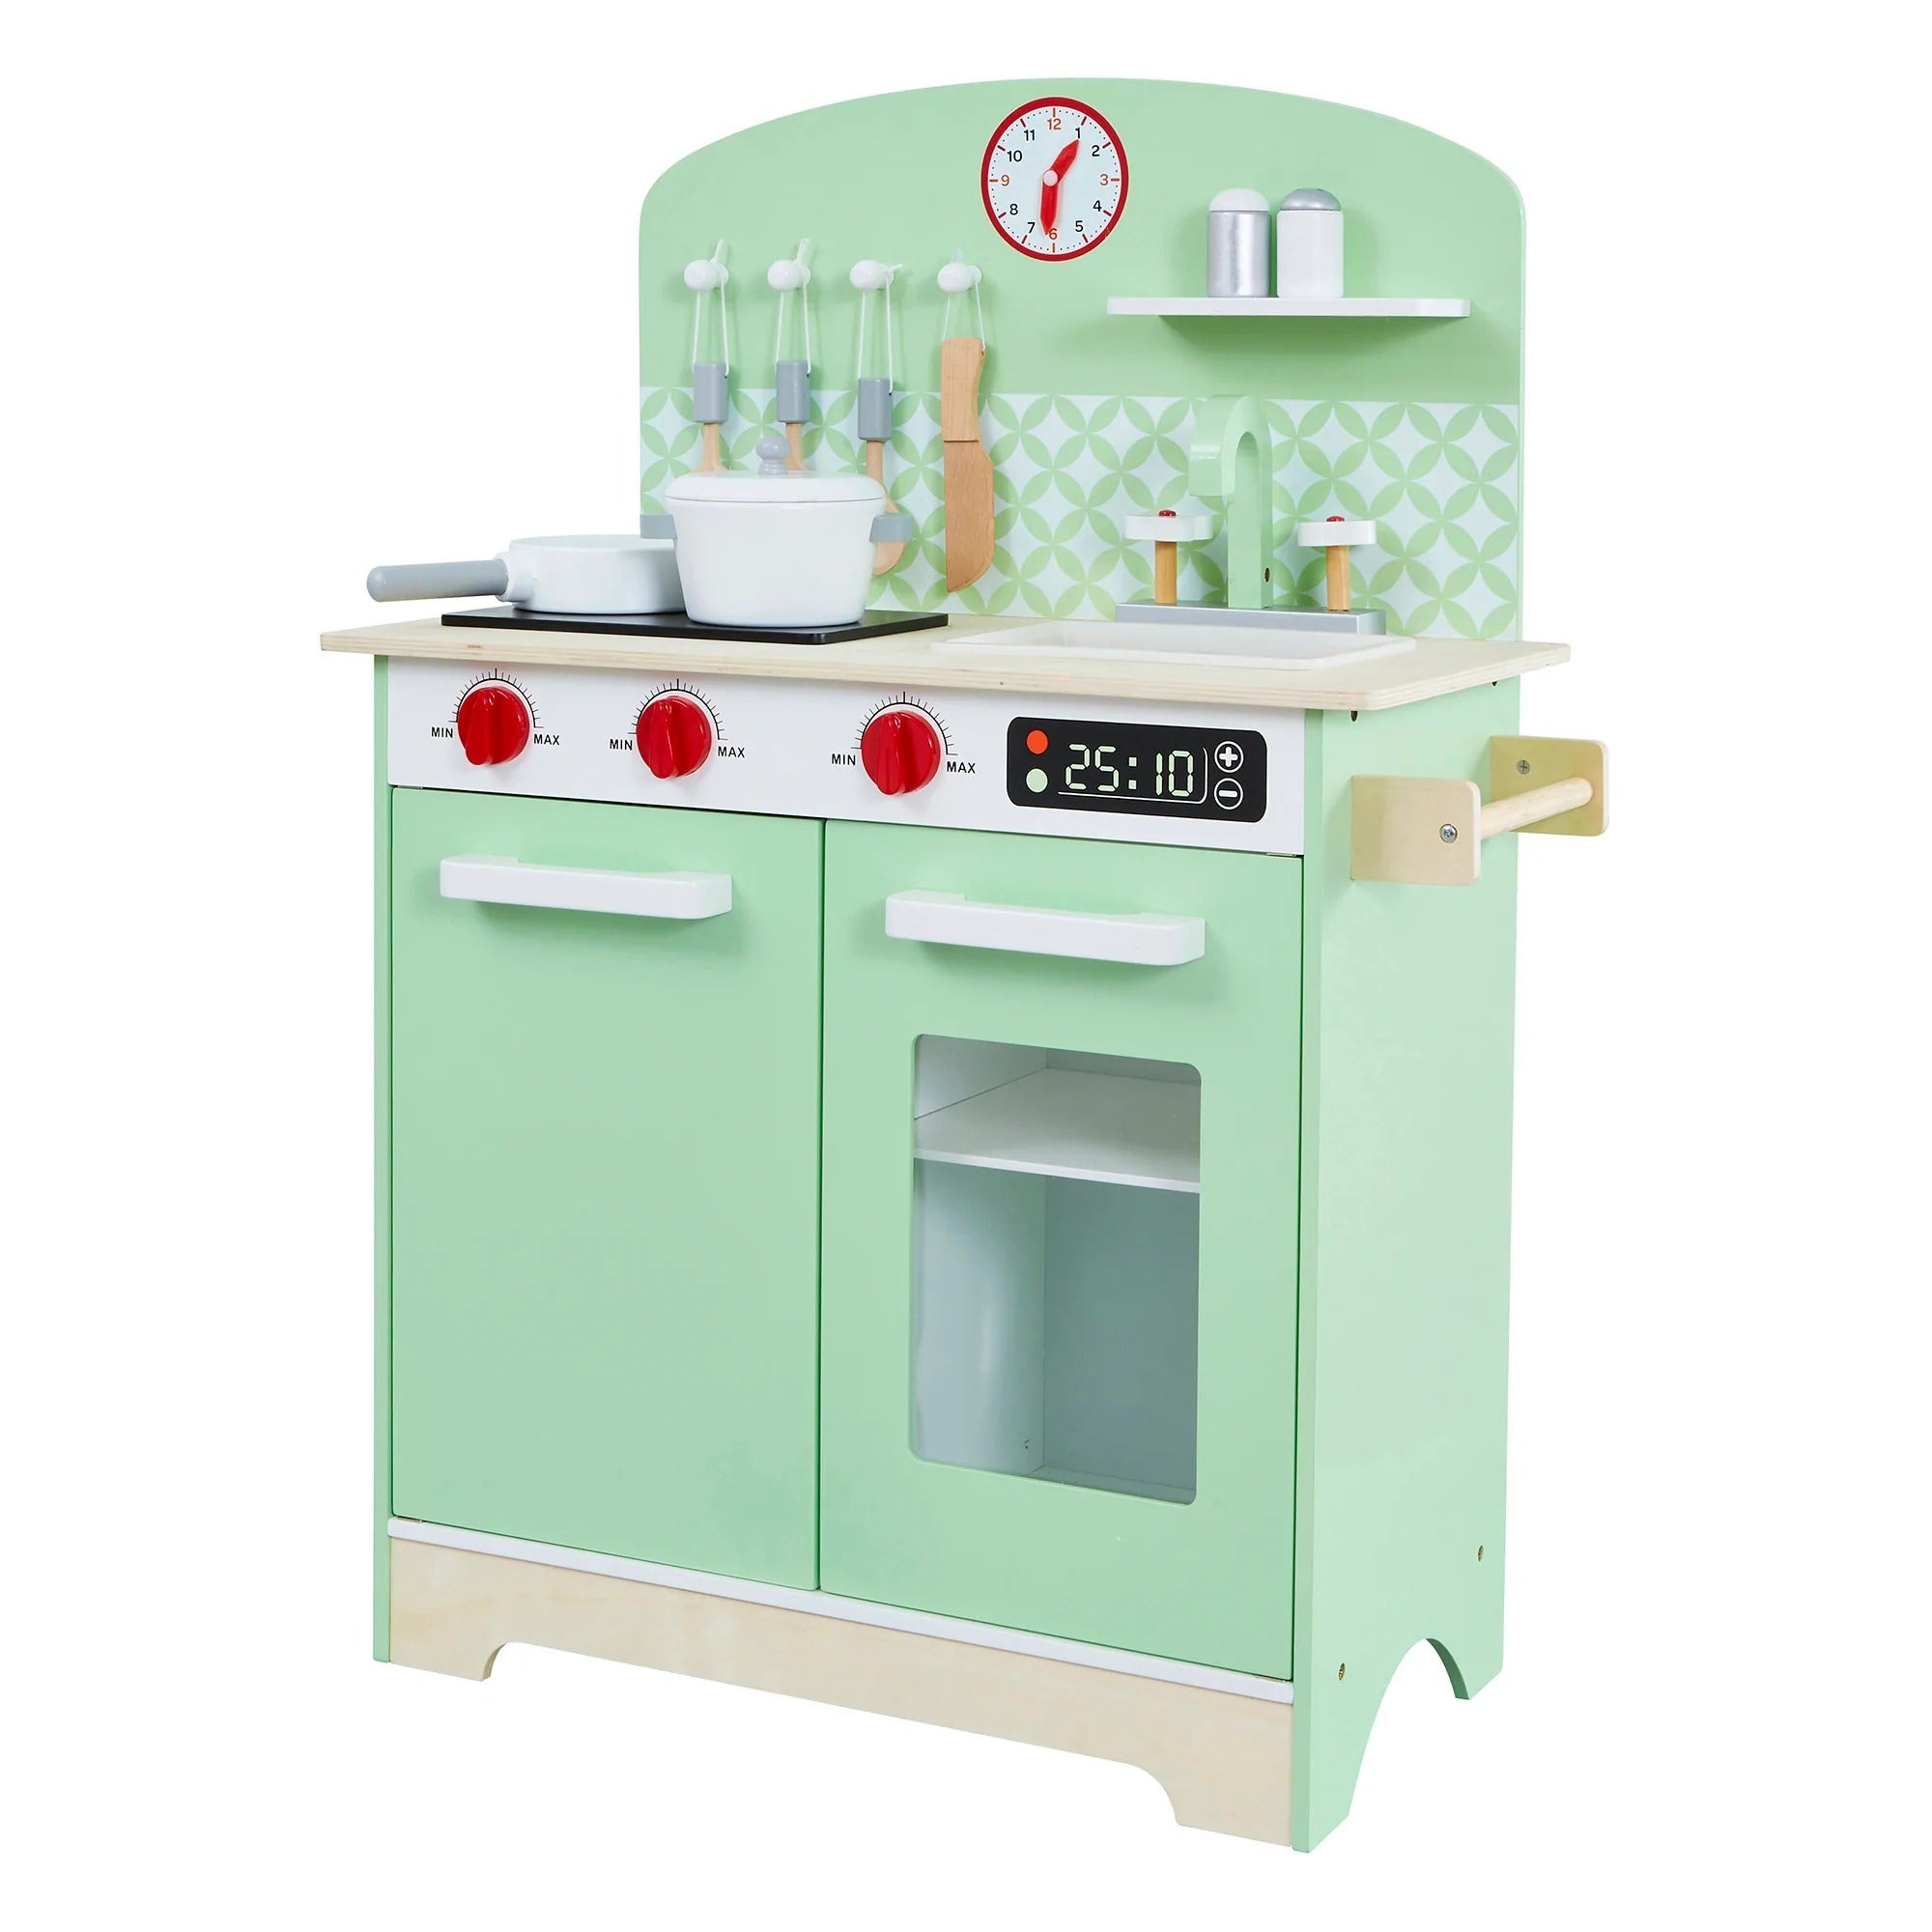 Kids Retro Play Kitchen, Our retro inspired wooden kids play kitchen is the perfect role play toy for boys and girls who love cooking. This is a standout set for your little ones to pretend play as they hone their cooking skills and make tasty dishes for friends and family. Features a classic pastel green and white wood finish with natural accents to fit the décor of any playroom or bedroom. Children will develop vocabulary, imagination and social skills as well as improving hand eye co-ordination, fine mot